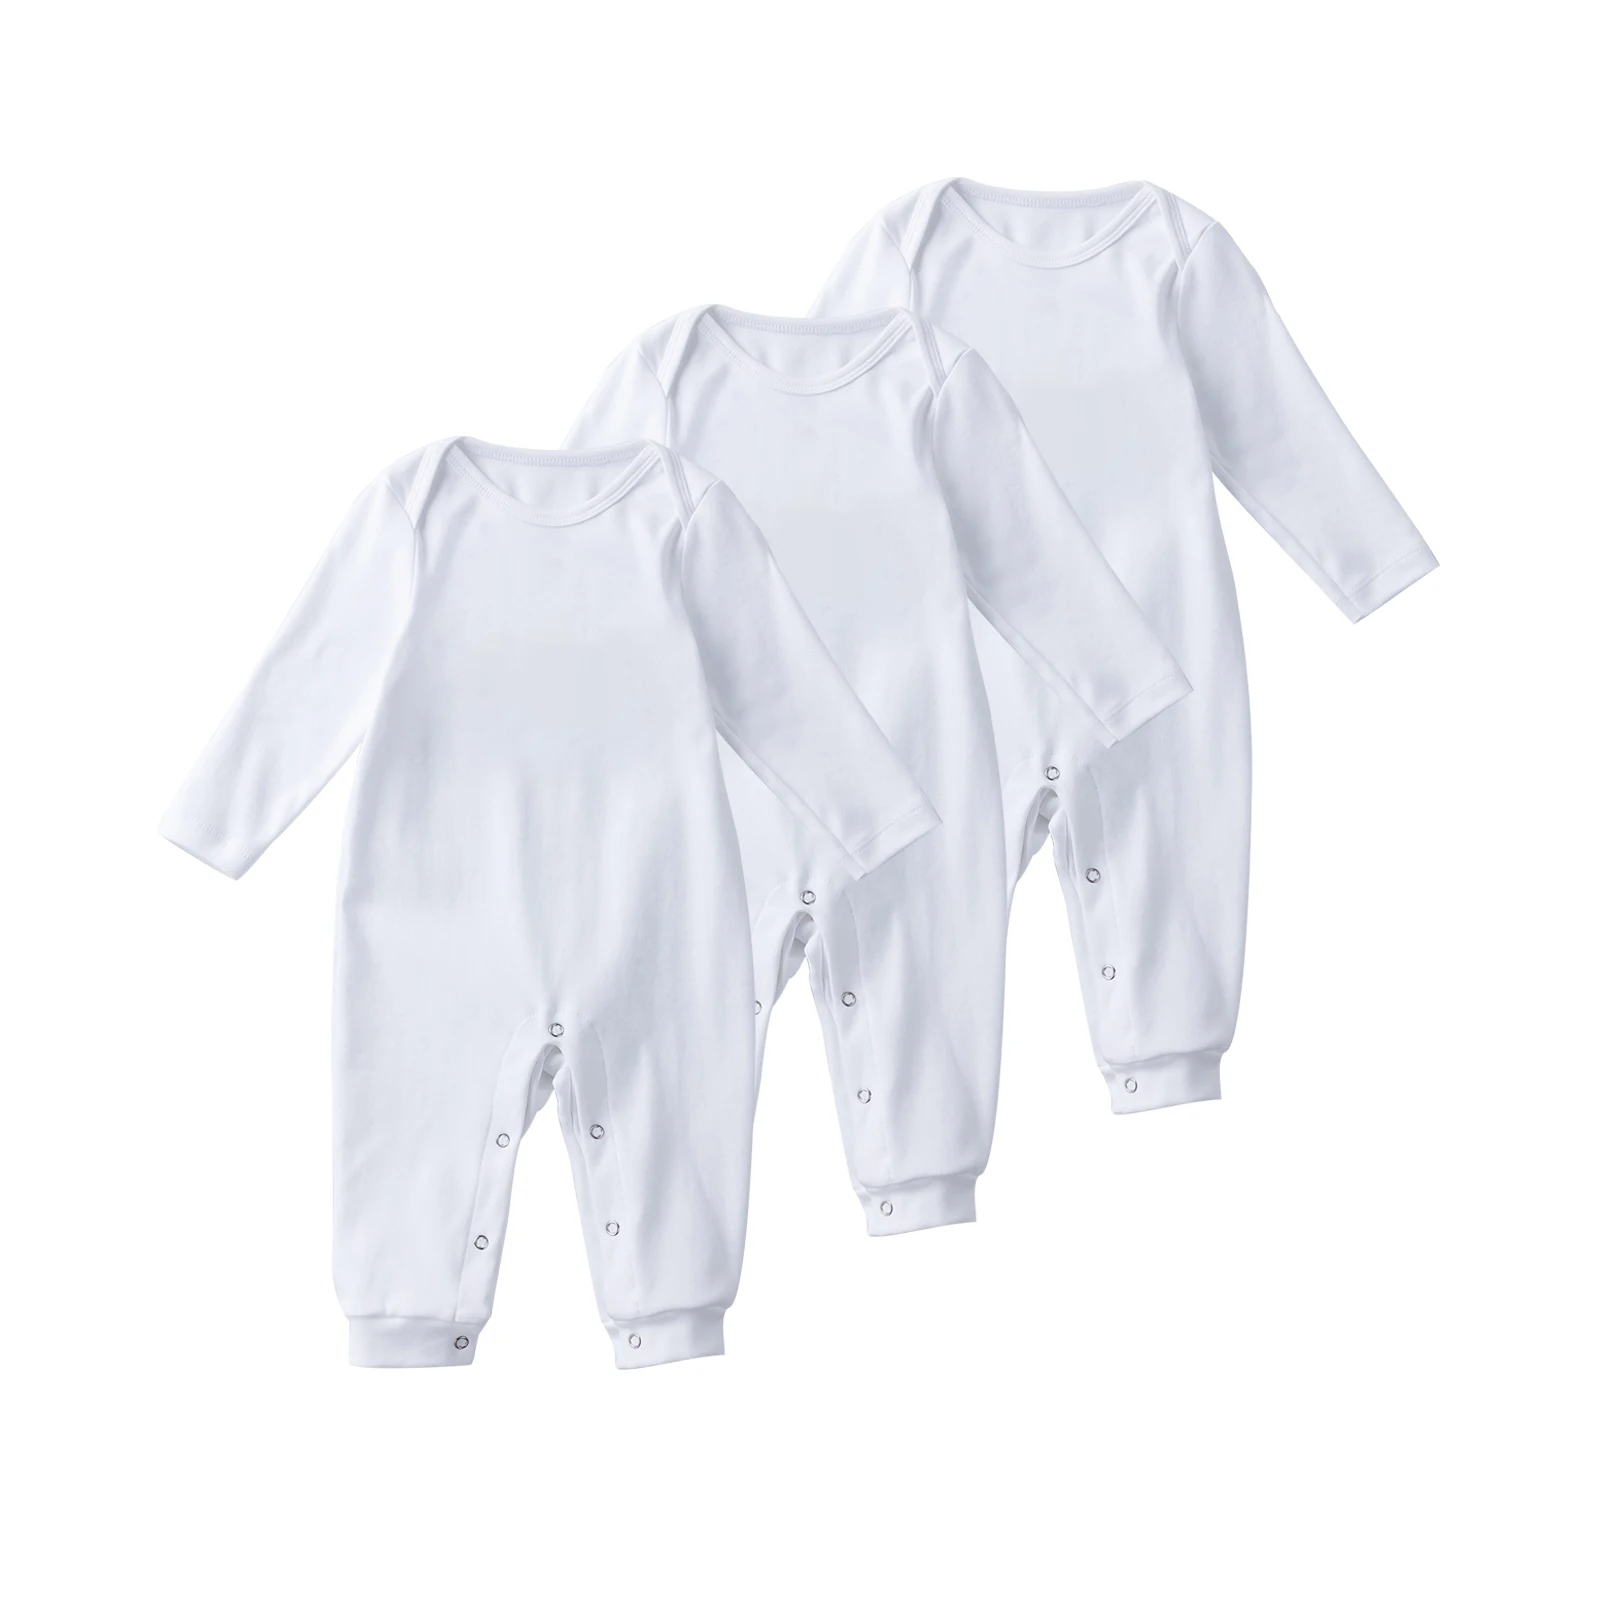 

Babany bebe Newborn Unisex Romper For Babies Clothes Long Sleeve Infant Baby Solid Bodysuit One-picec Jumpsuit 3pcs